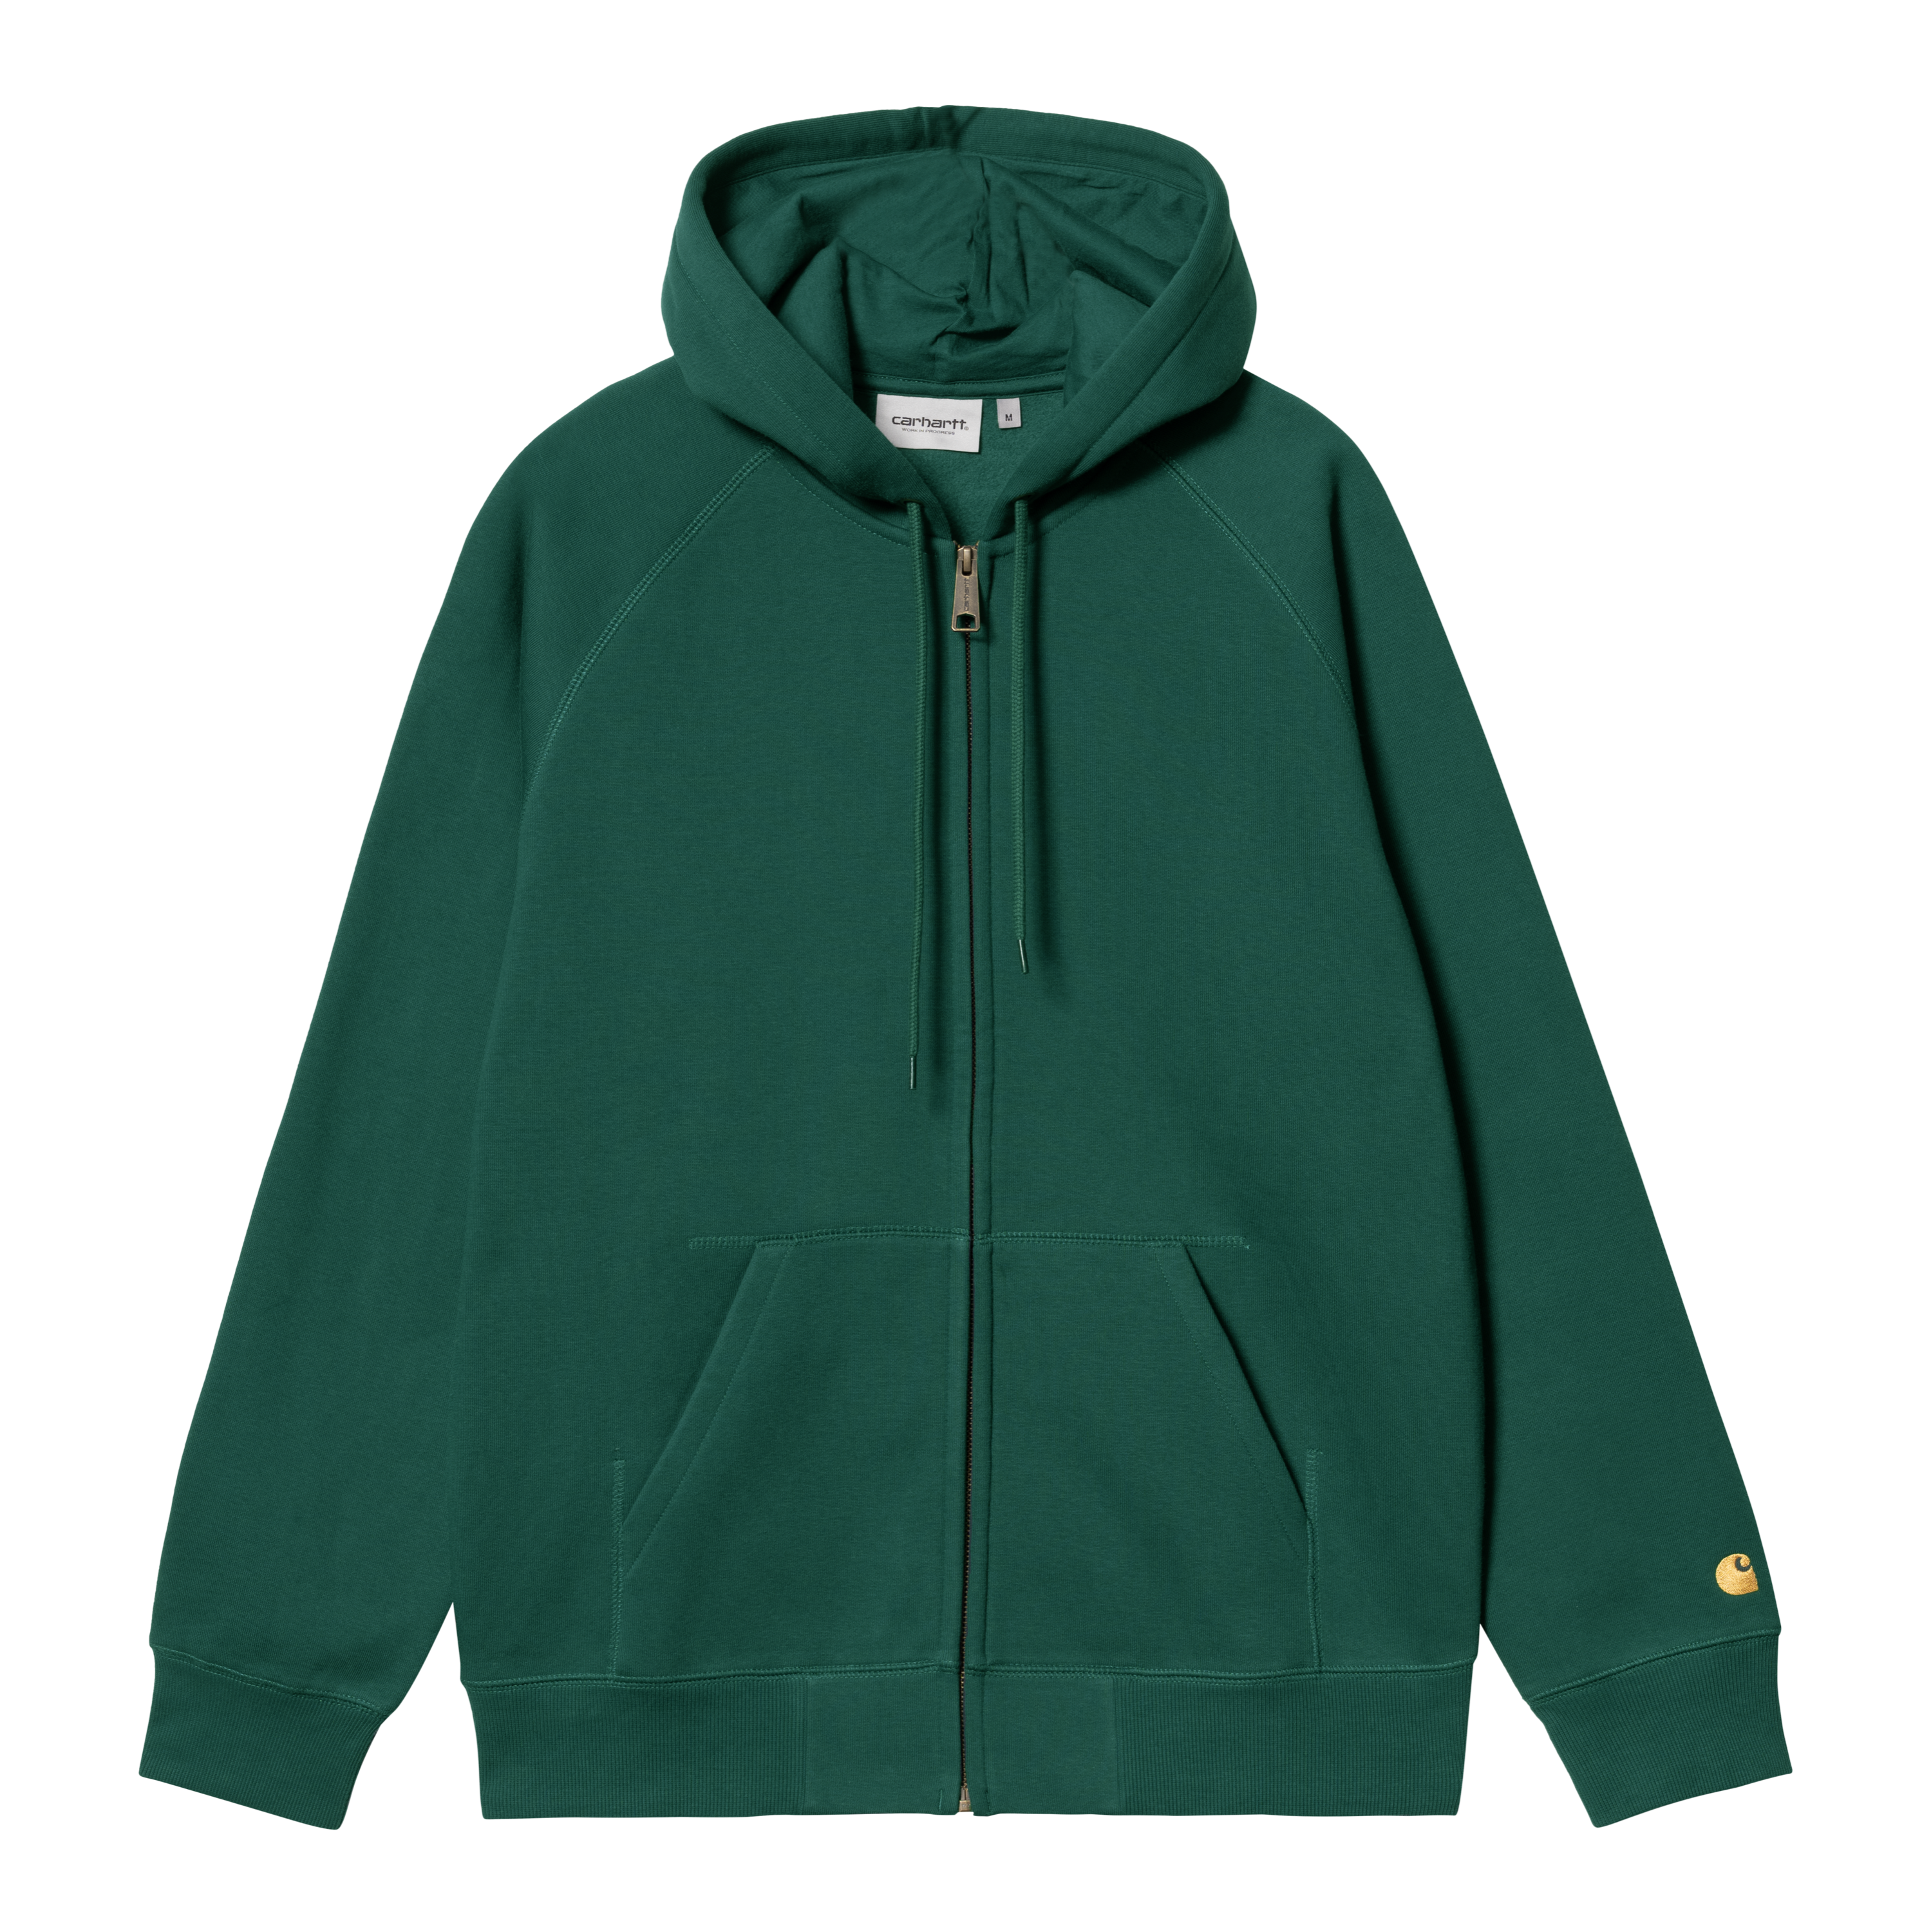 Carhartt WIP Hooded Chase Jacket in Green